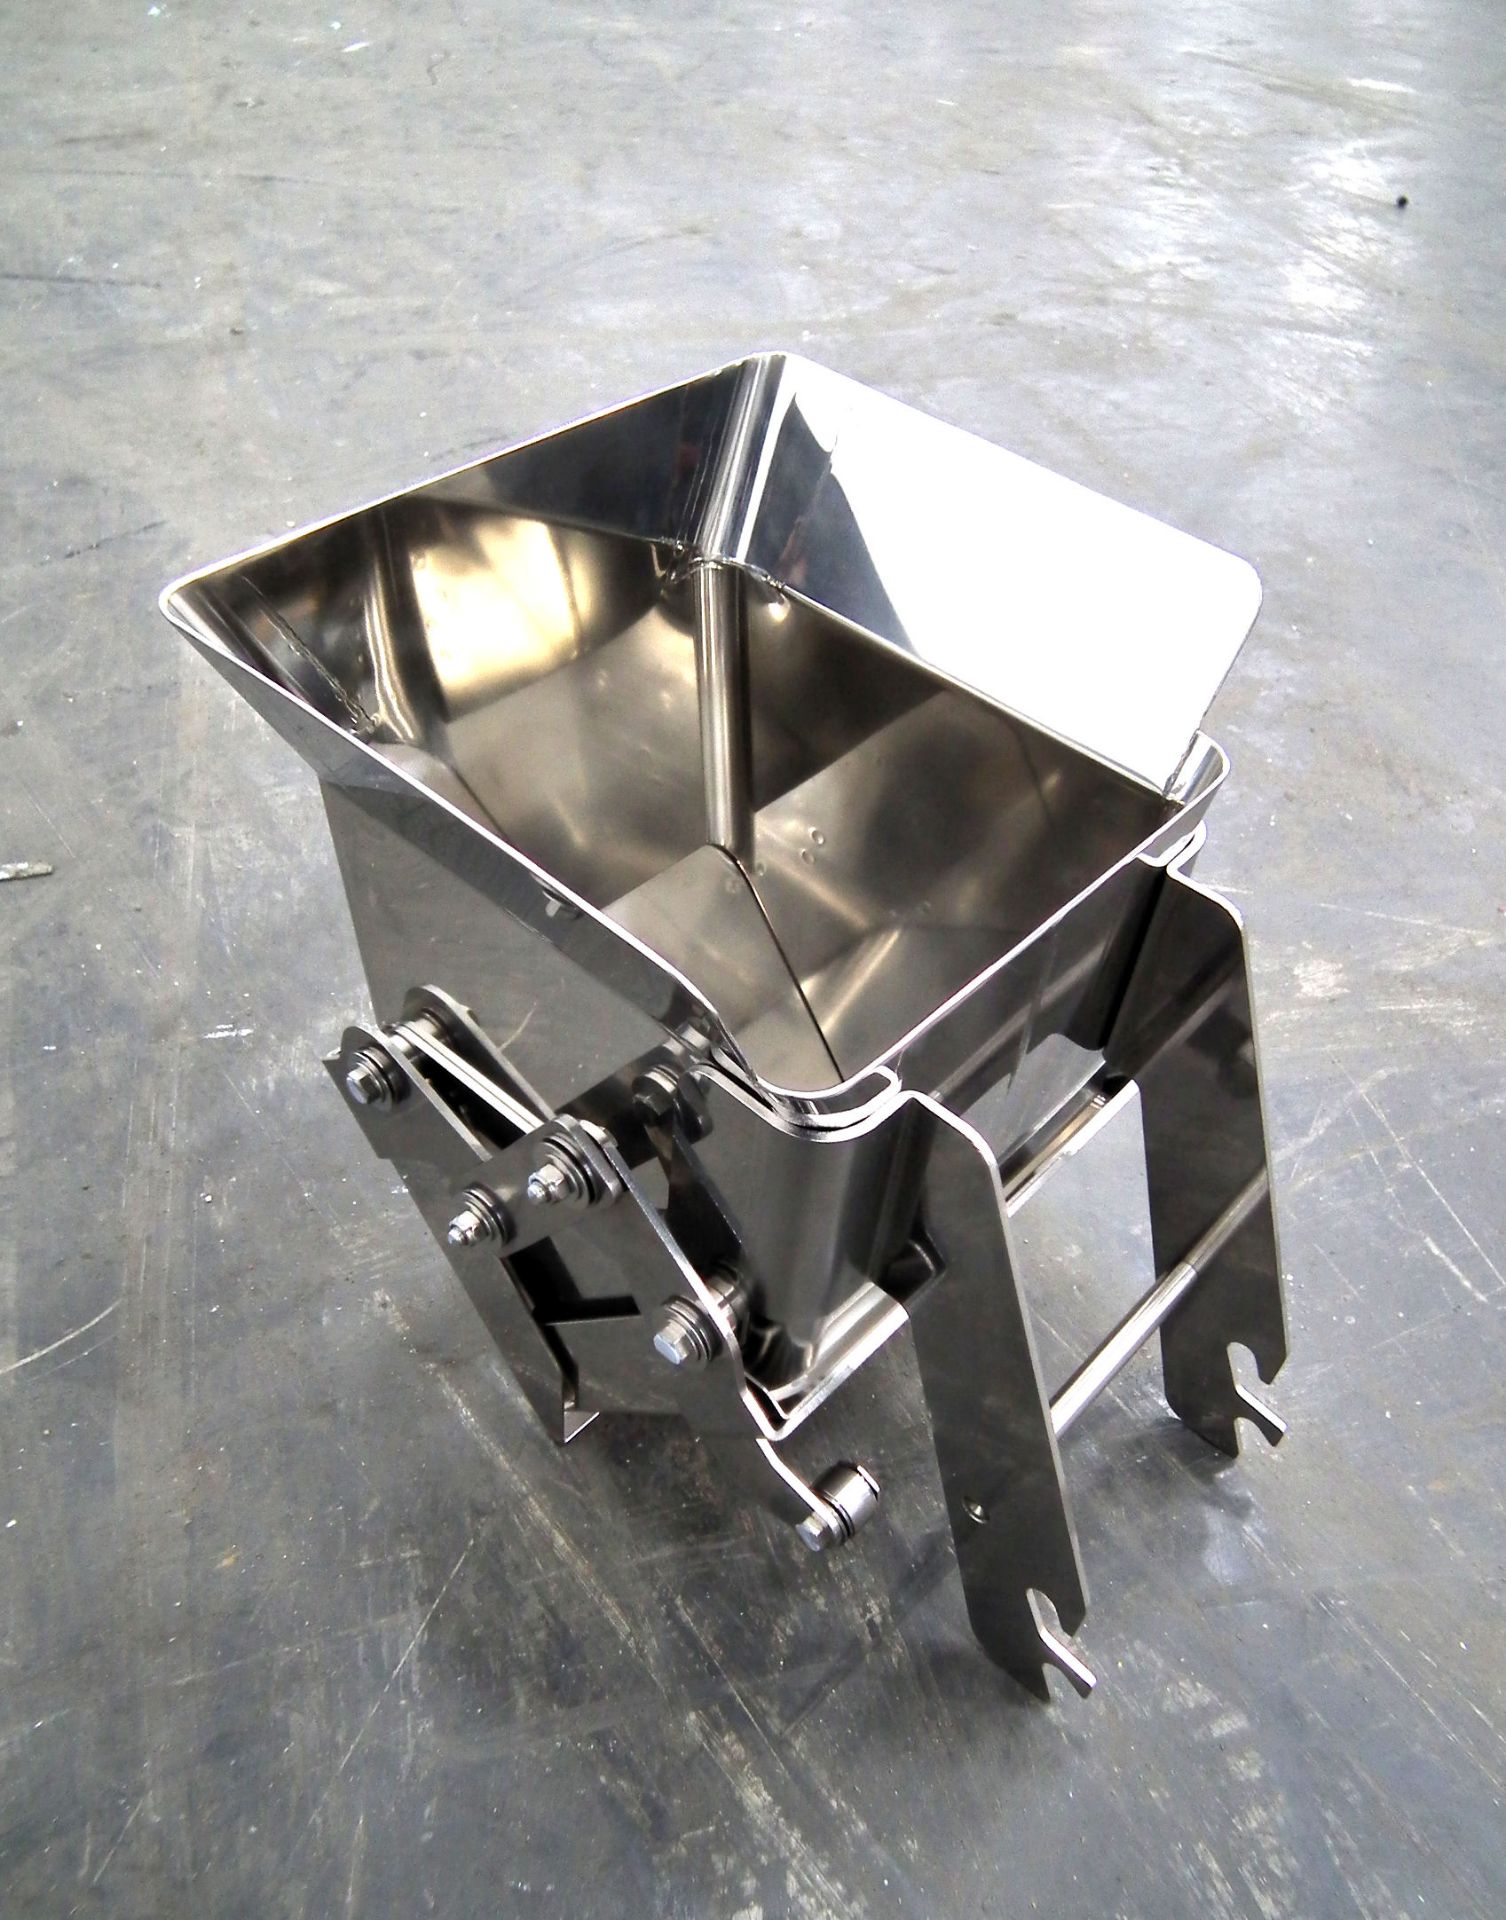 Ishida 14 Head Scale Buckets and Cones for CCW-214 - Image 7 of 10